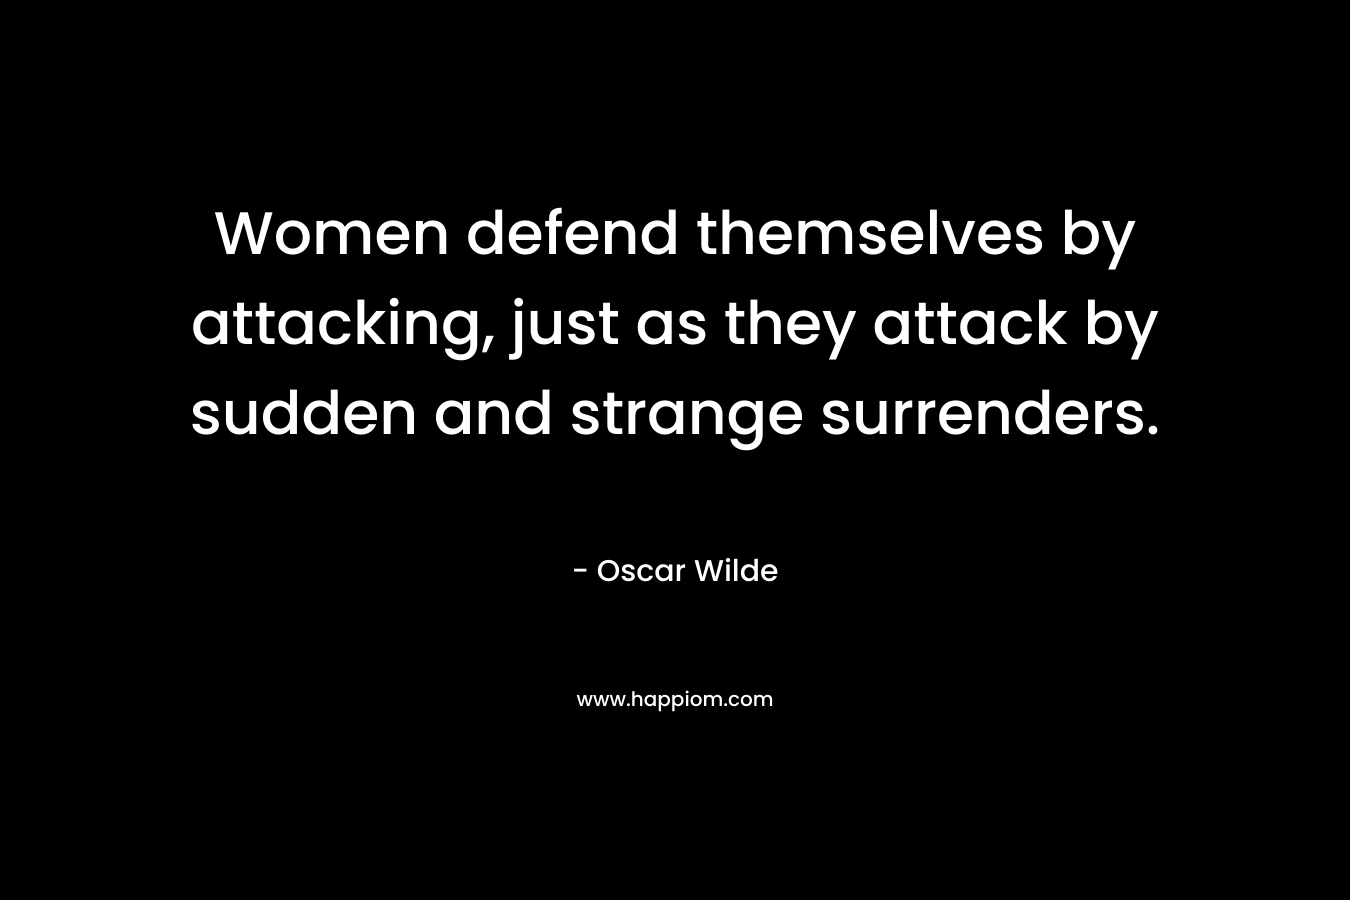 Women defend themselves by attacking, just as they attack by sudden and strange surrenders.